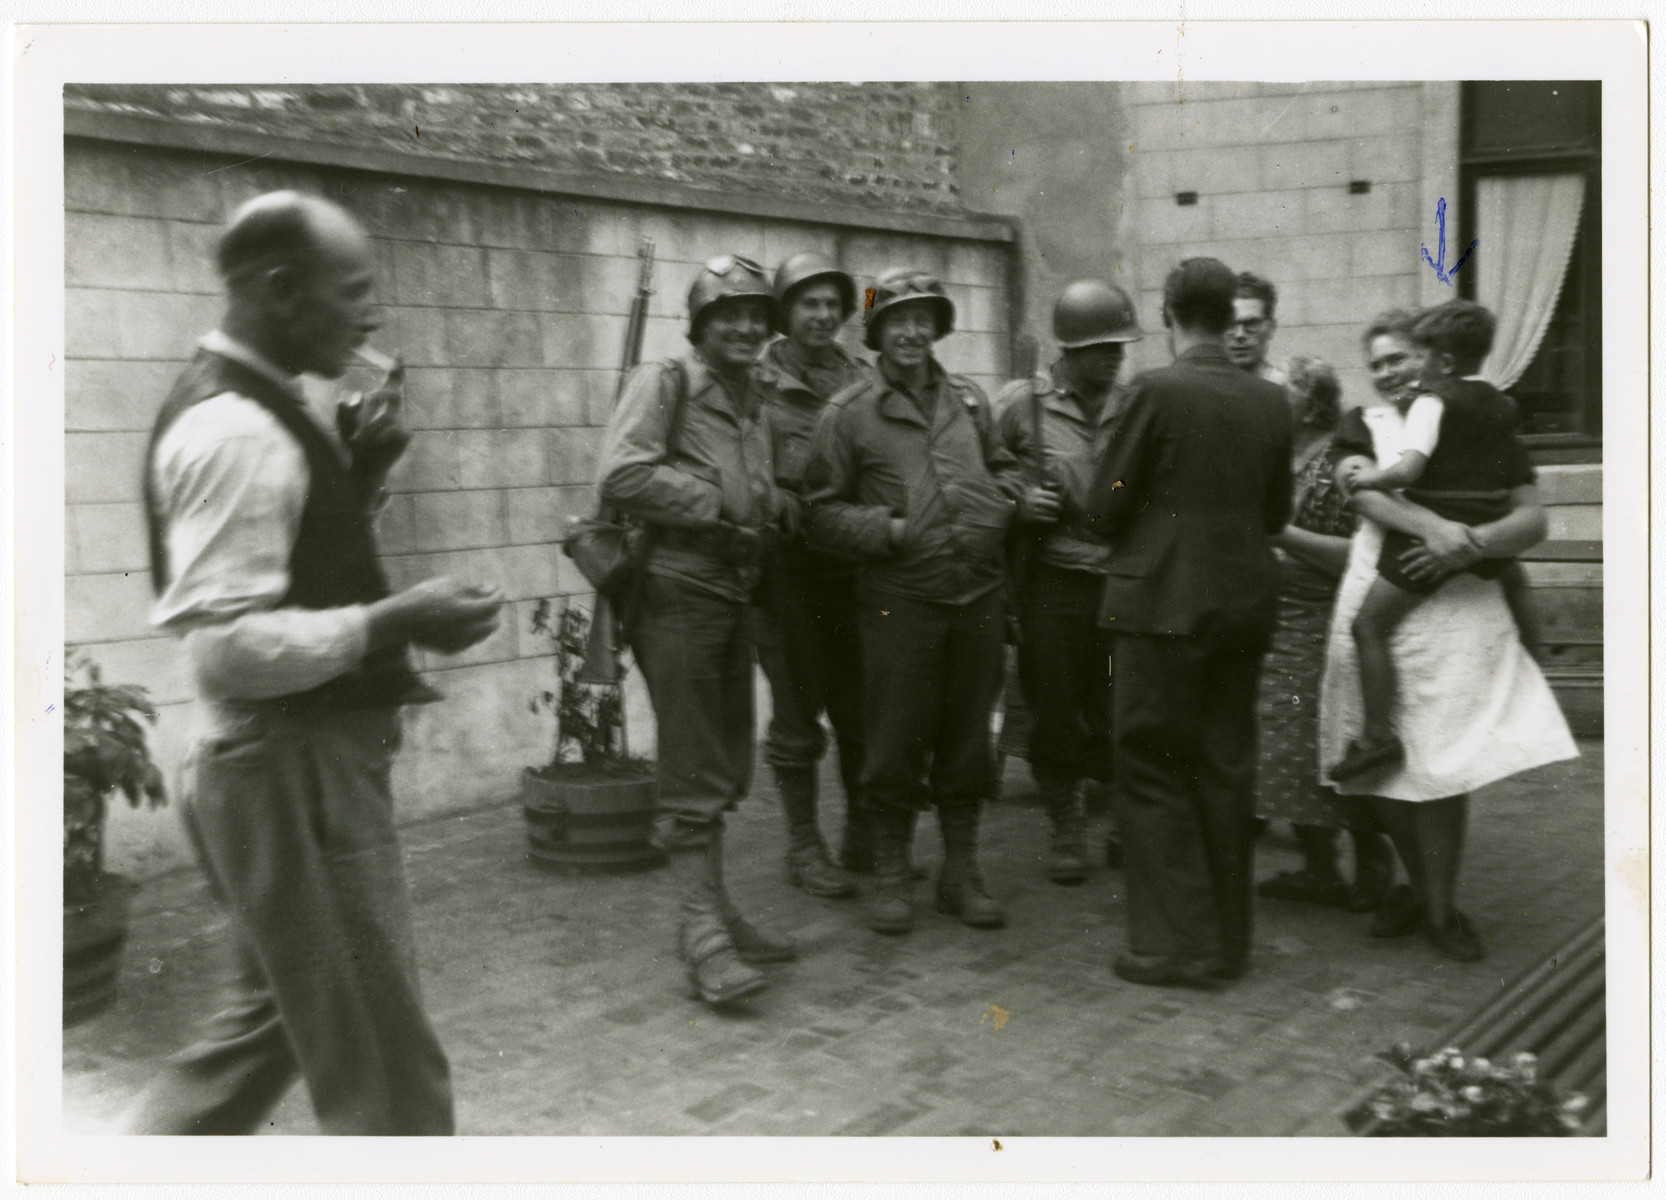 American soldiers liberate the town of Perwez.

Pictured on the right is Mrs. Hemptine Stas, the wife of the butcher, who was hiding the Jewish child Albert Szabo who she is holding.  She lived next door to the Henrards, the rescuers of Simon Steil.